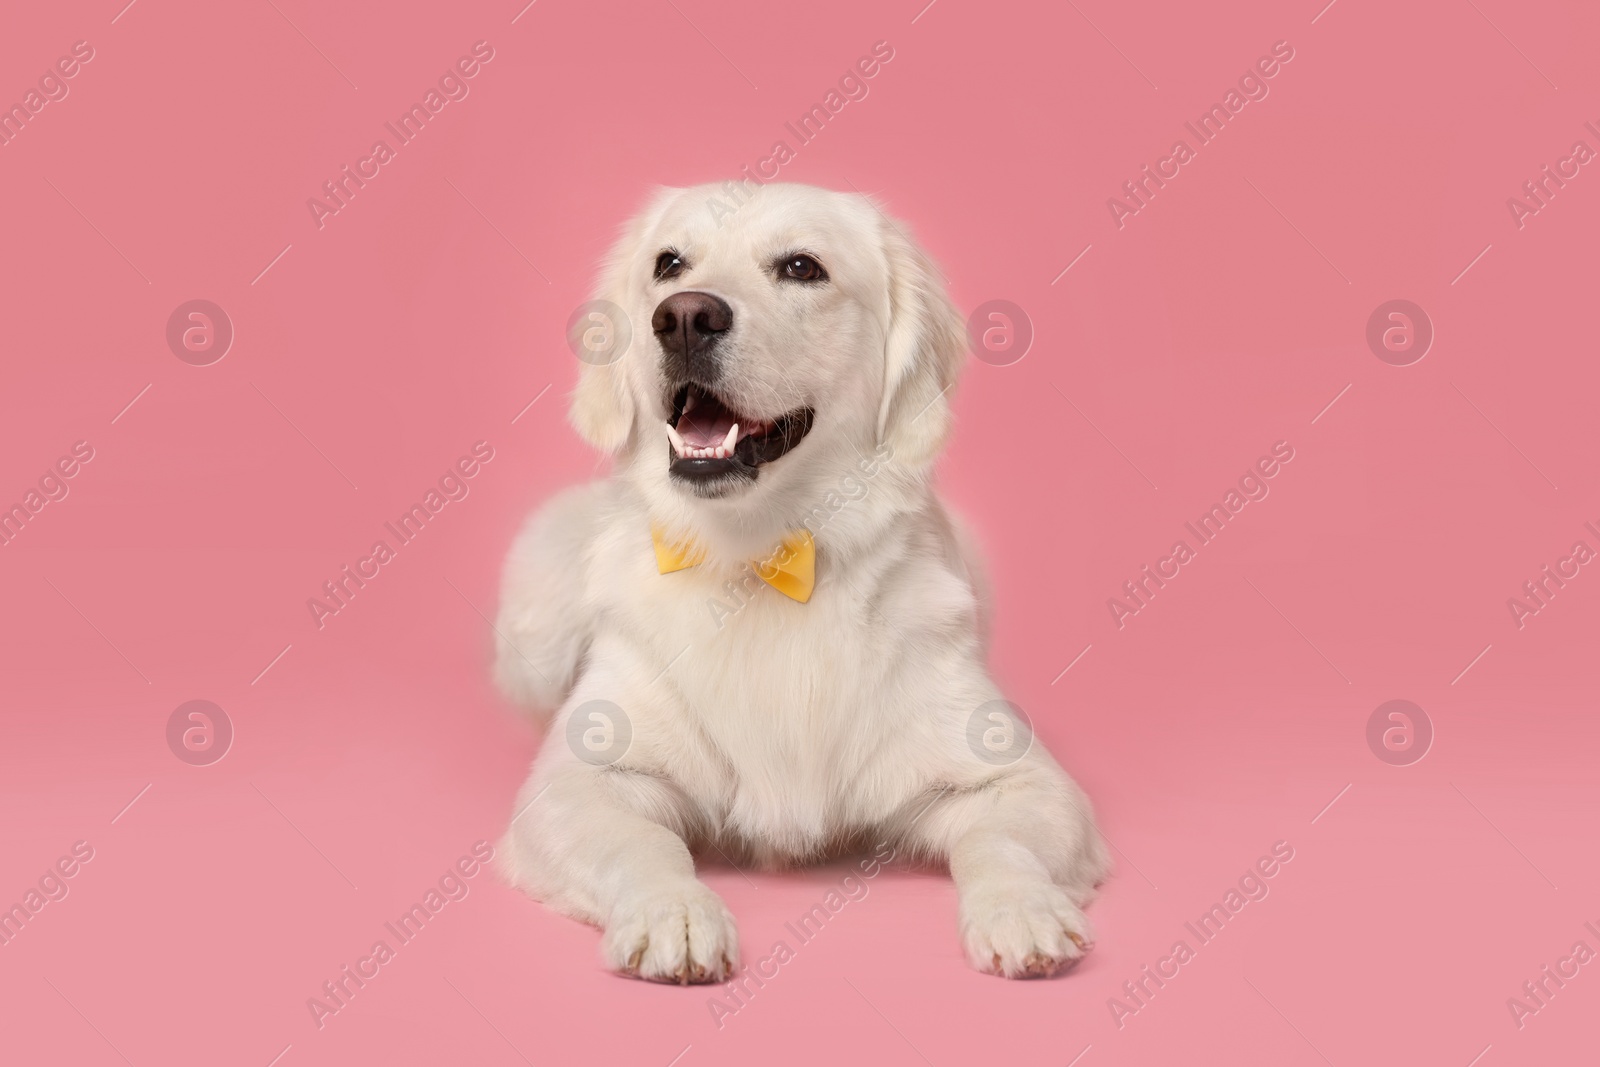 Photo of Cute Labrador Retriever dog with bow tie on pink background